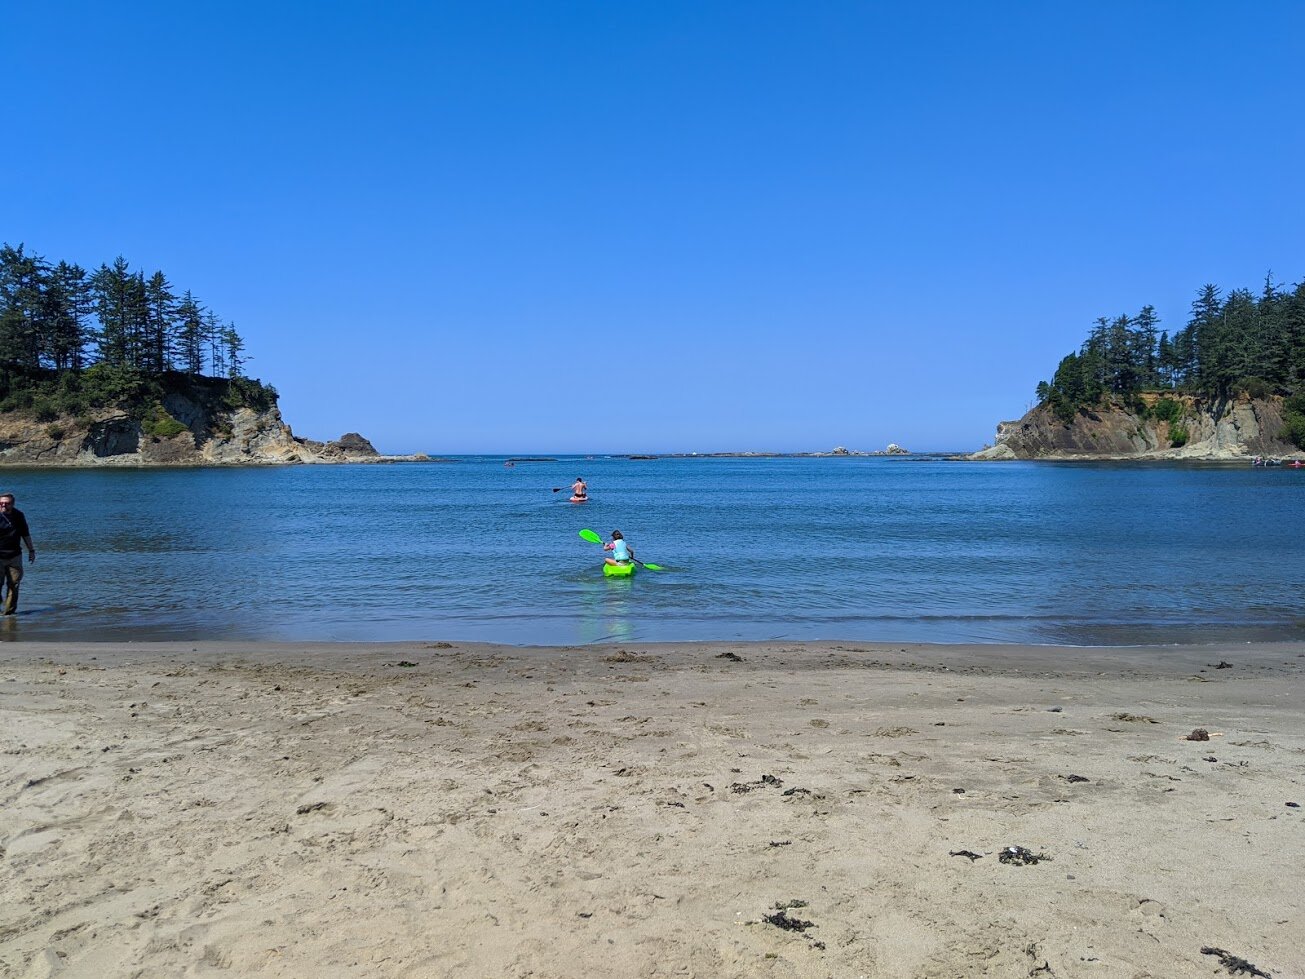 SUNSET BAY STATE PARK - Charleston - Coos Bay - What to do in Southern Oregon - Travel